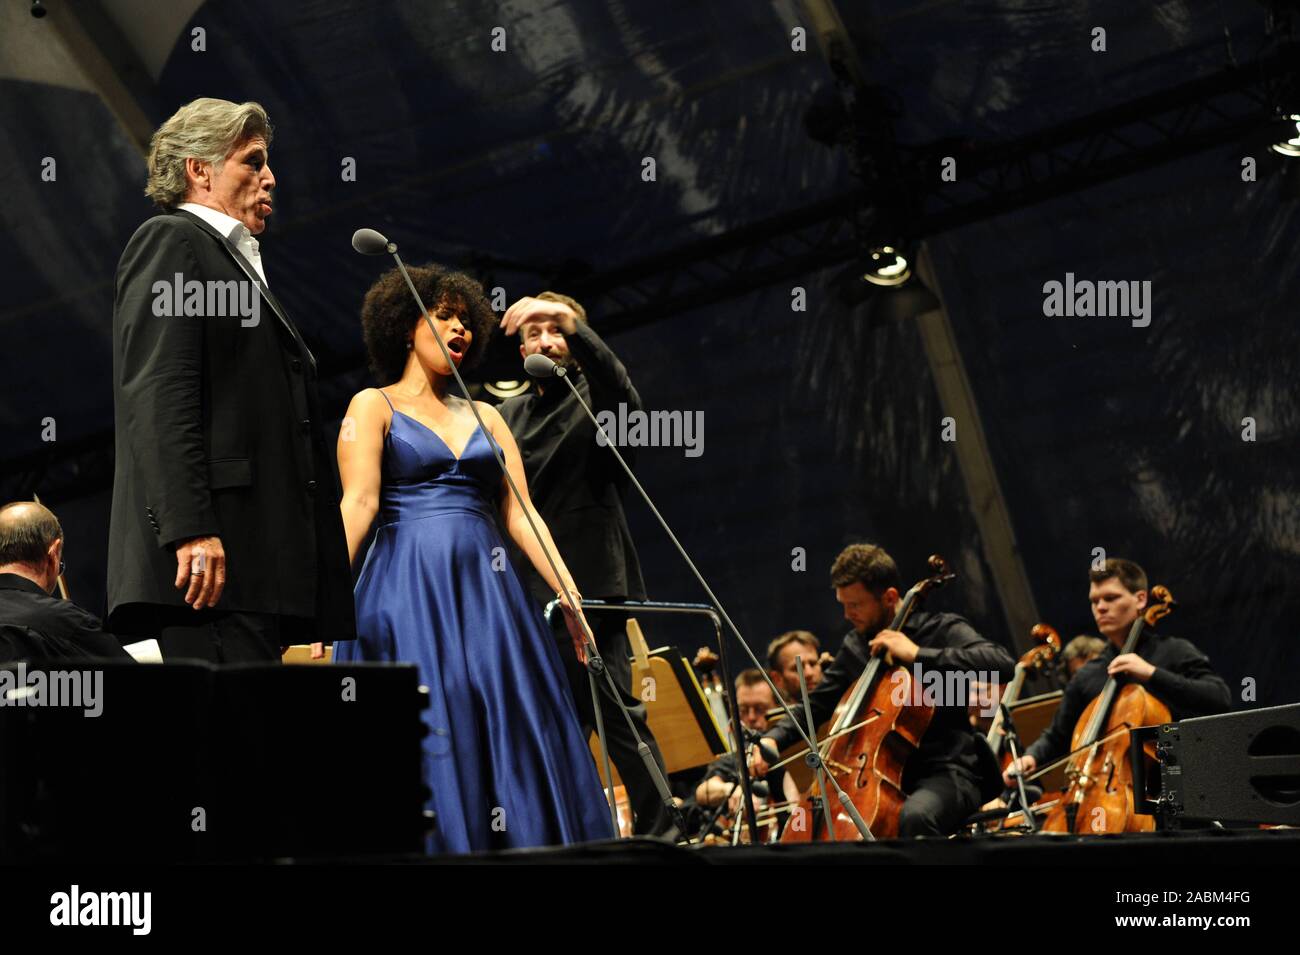 'Opera for All' at Munich's Marstallplatz: more than 10,000 visitors listen to the festival concert with the Bavarian State Orchestra conducted by Music Director Kiril Petrenko (r.) and the two soloists Golda Schulz (m.) and Thomas Hampson (l.). Works from various Broadway musicals will be performed. [automated translation] Stock Photo